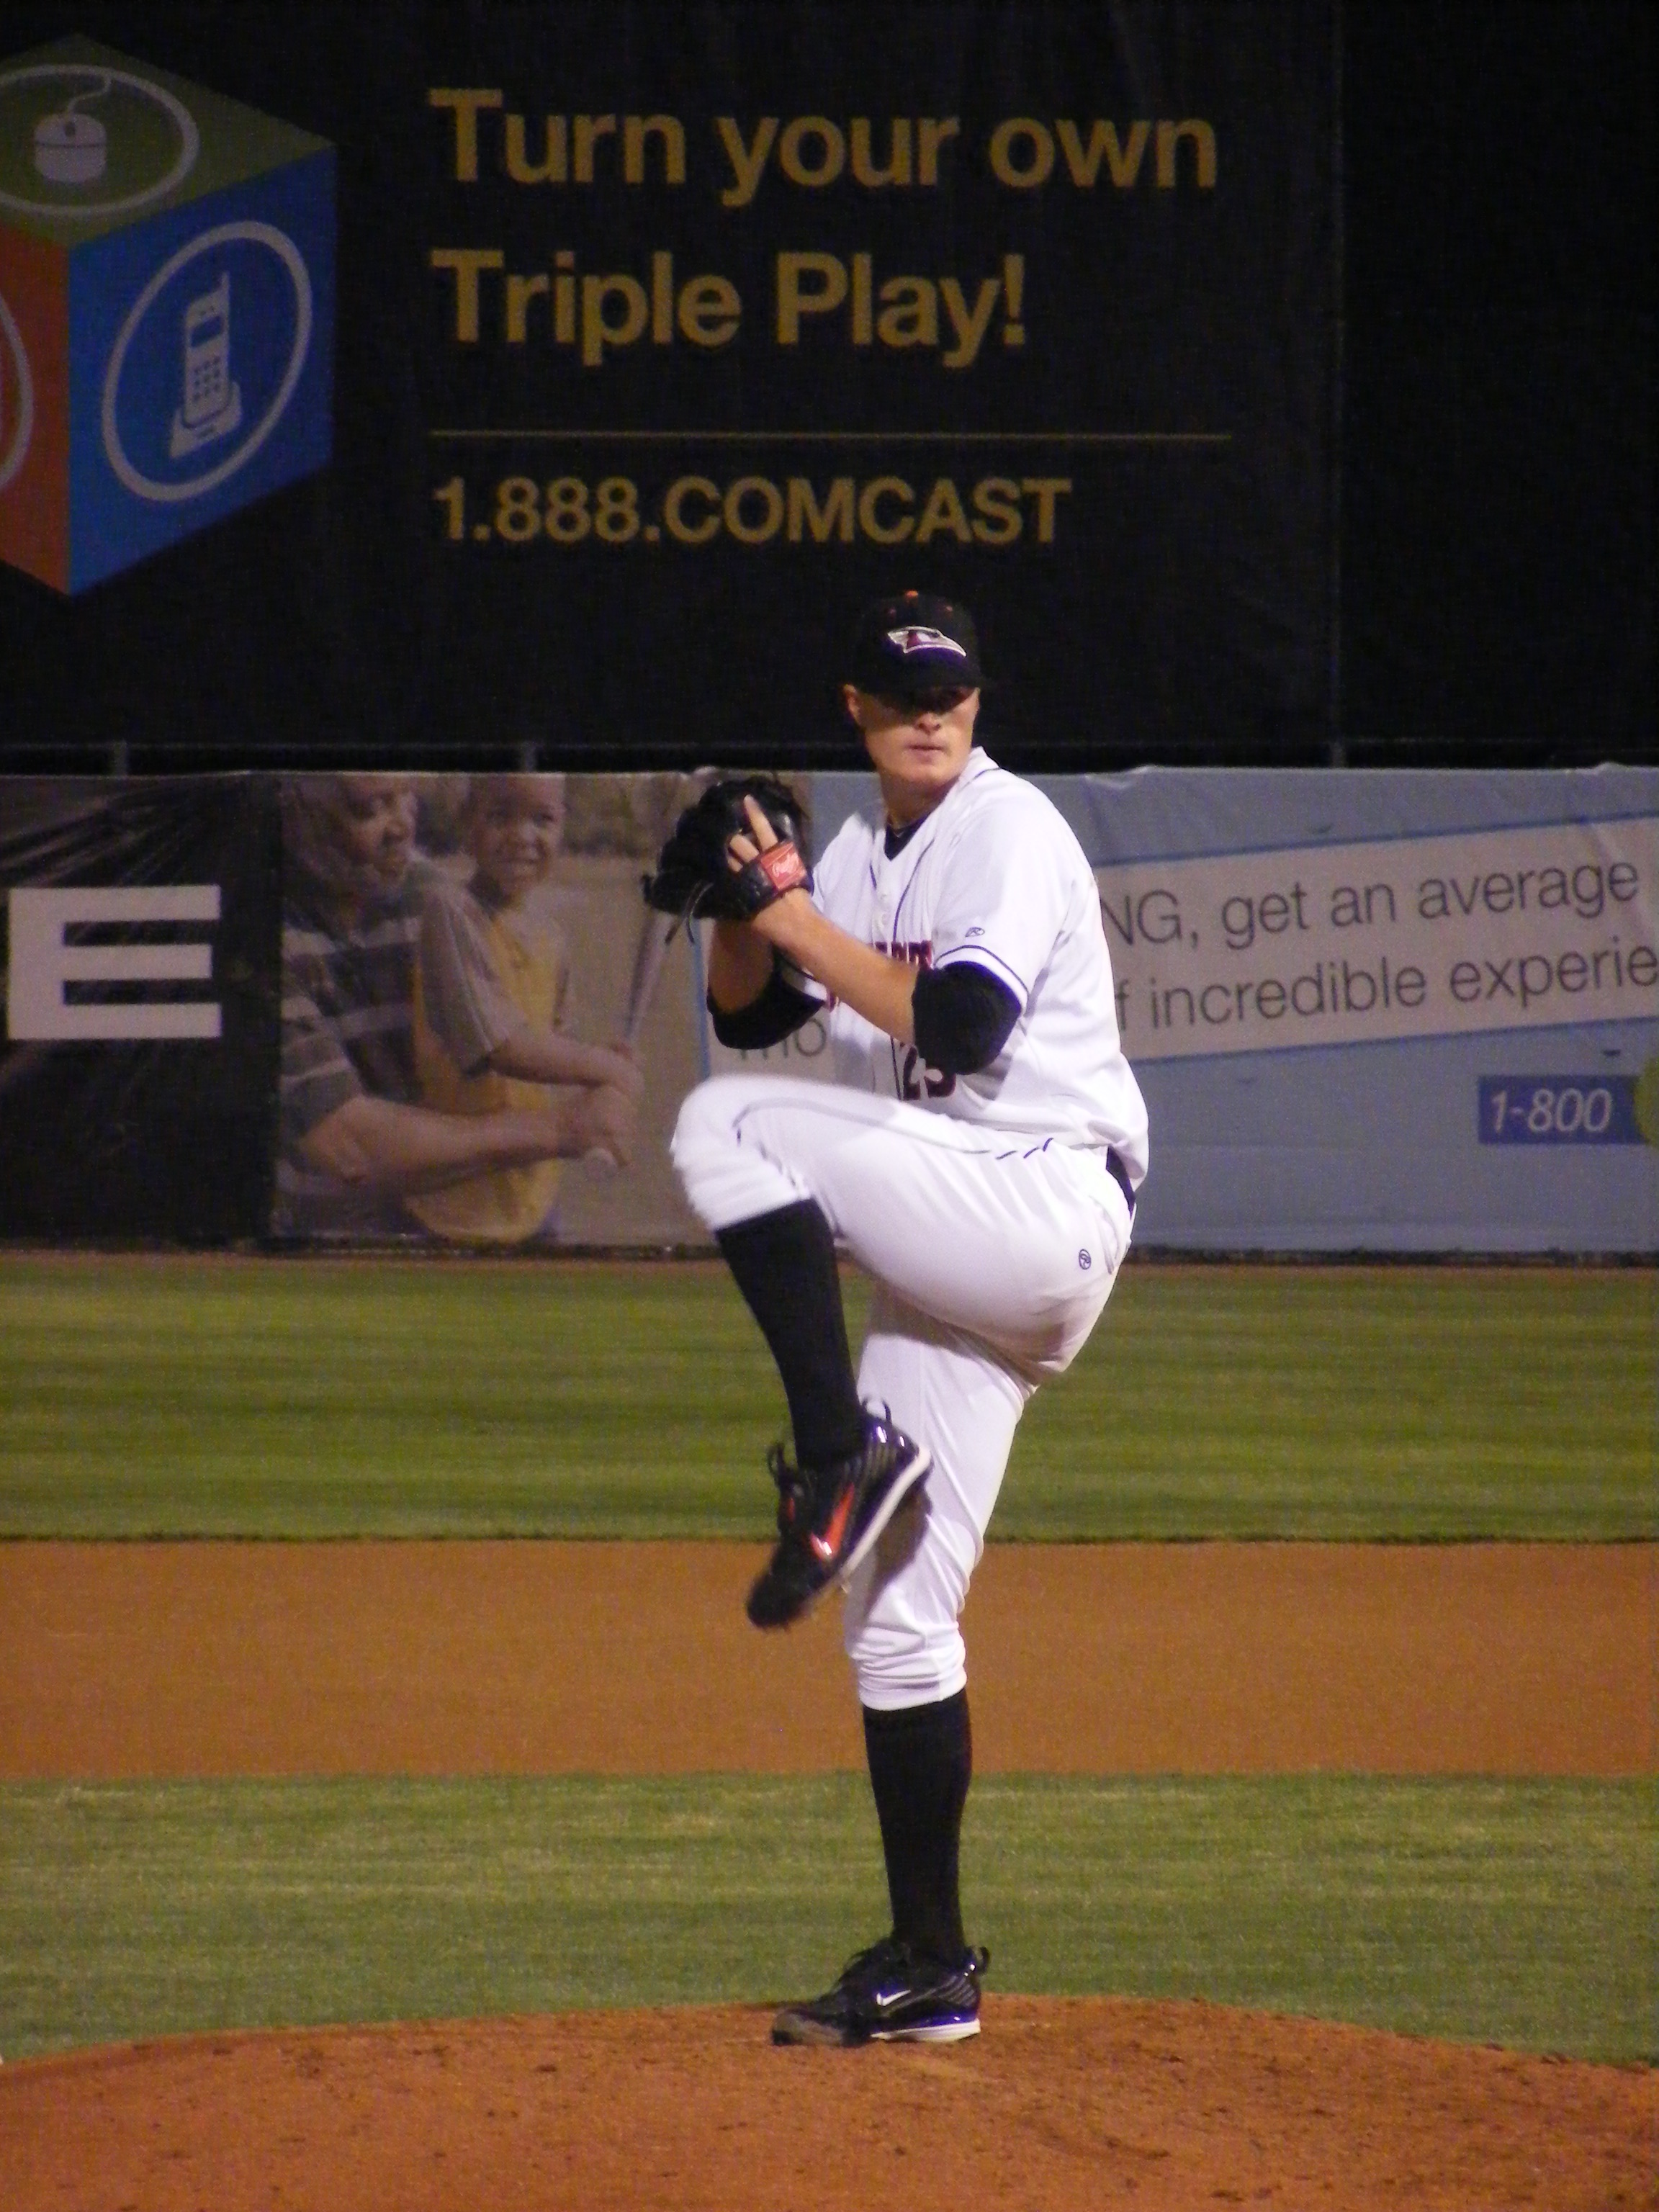 Jesse Beal started Delmarva's home opener on April 16 - unfortunately it wasn't one of his better outings.